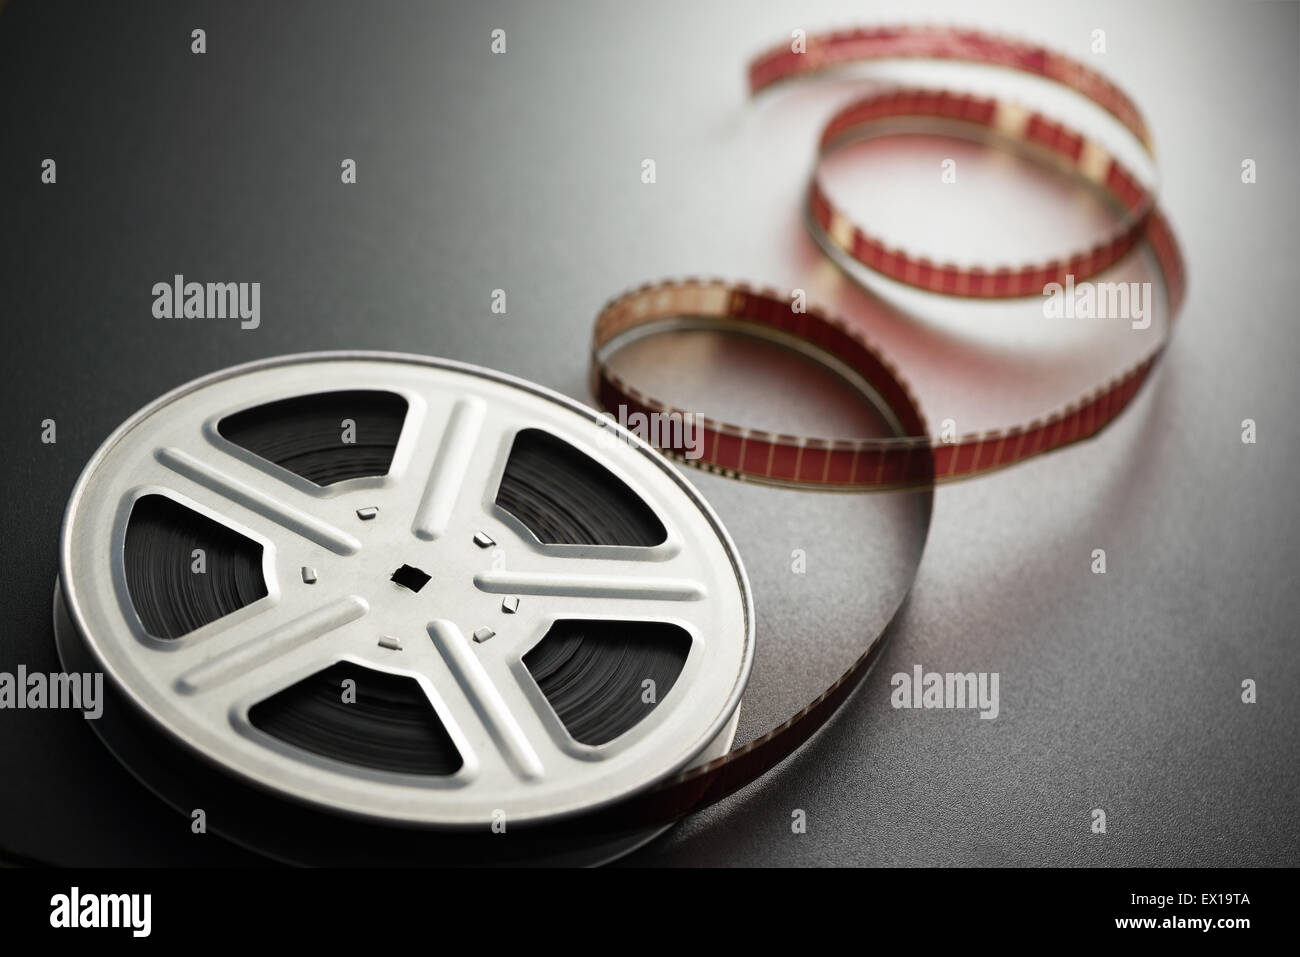 Old movie film reels and canisters Stock Photo - Alamy